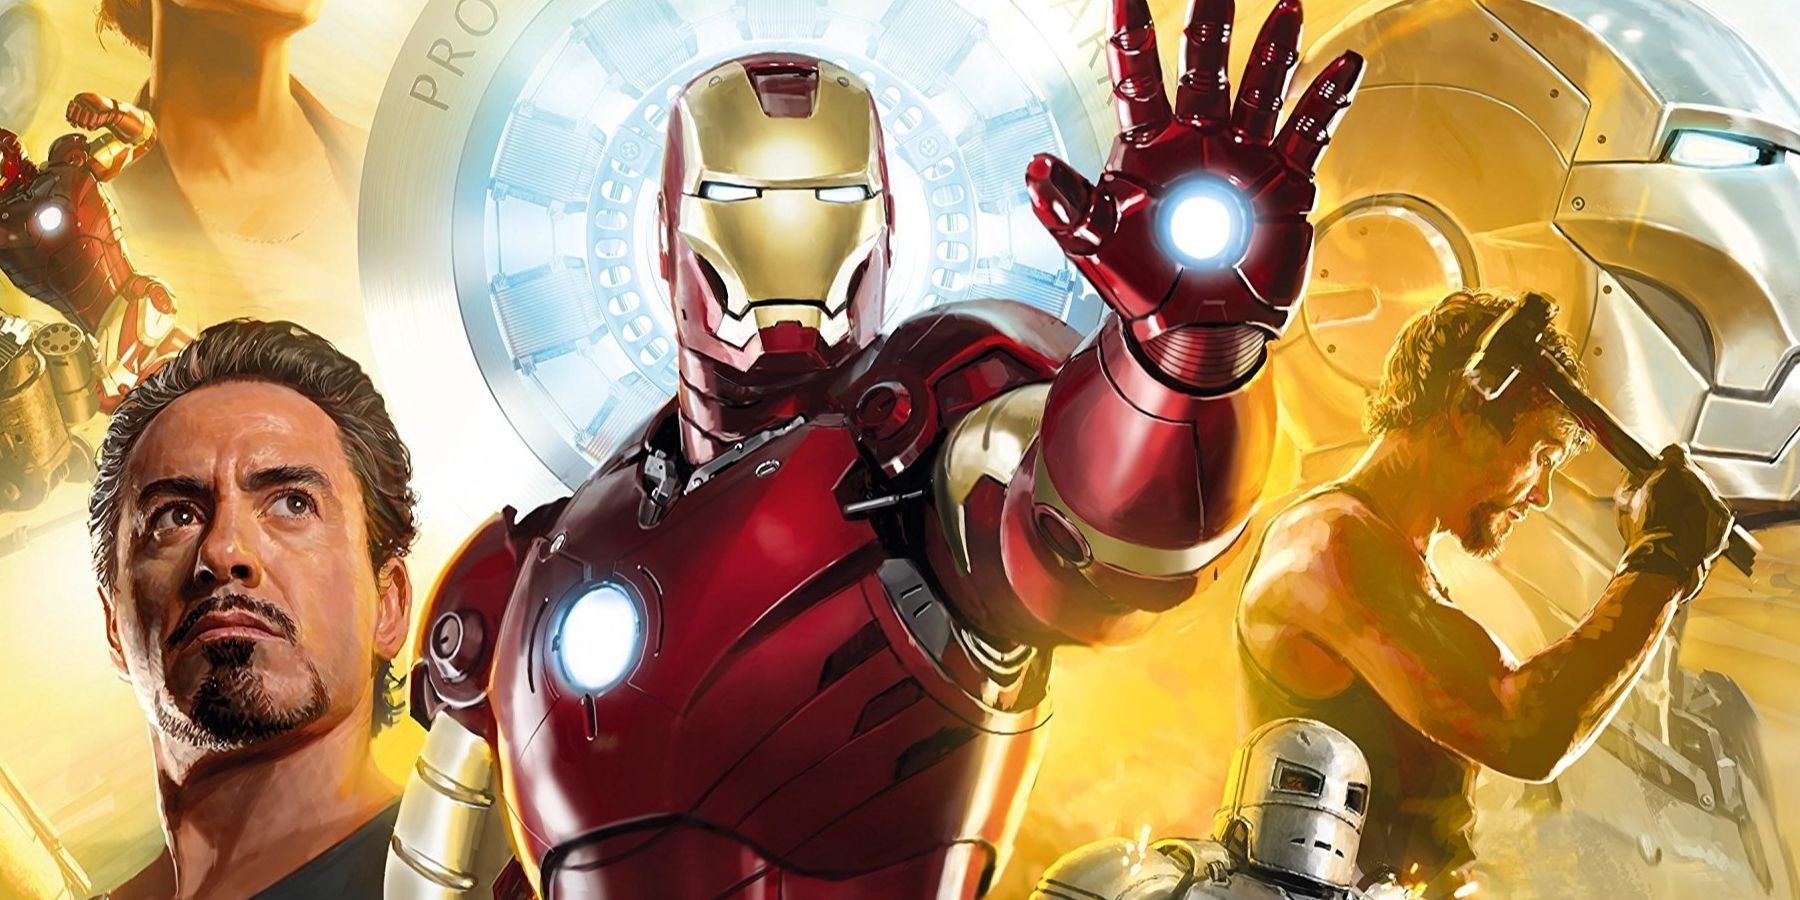 Art of Iron Man: 10th Anniversary Edition Book Gets Gorgeous Cover